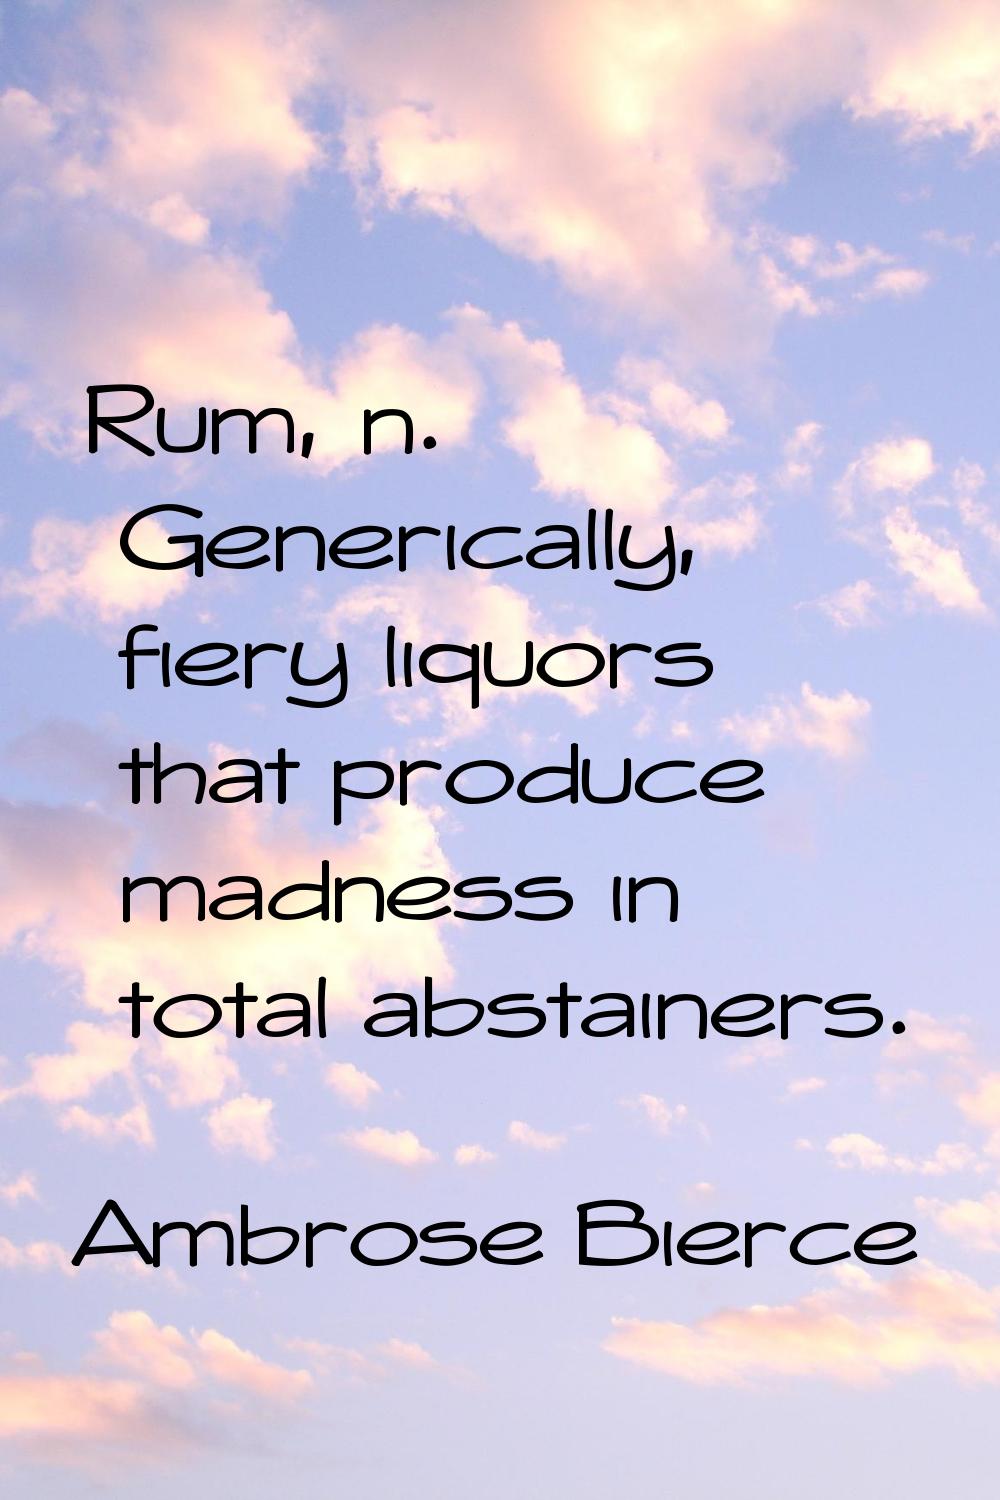 Rum, n. Generically, fiery liquors that produce madness in total abstainers.